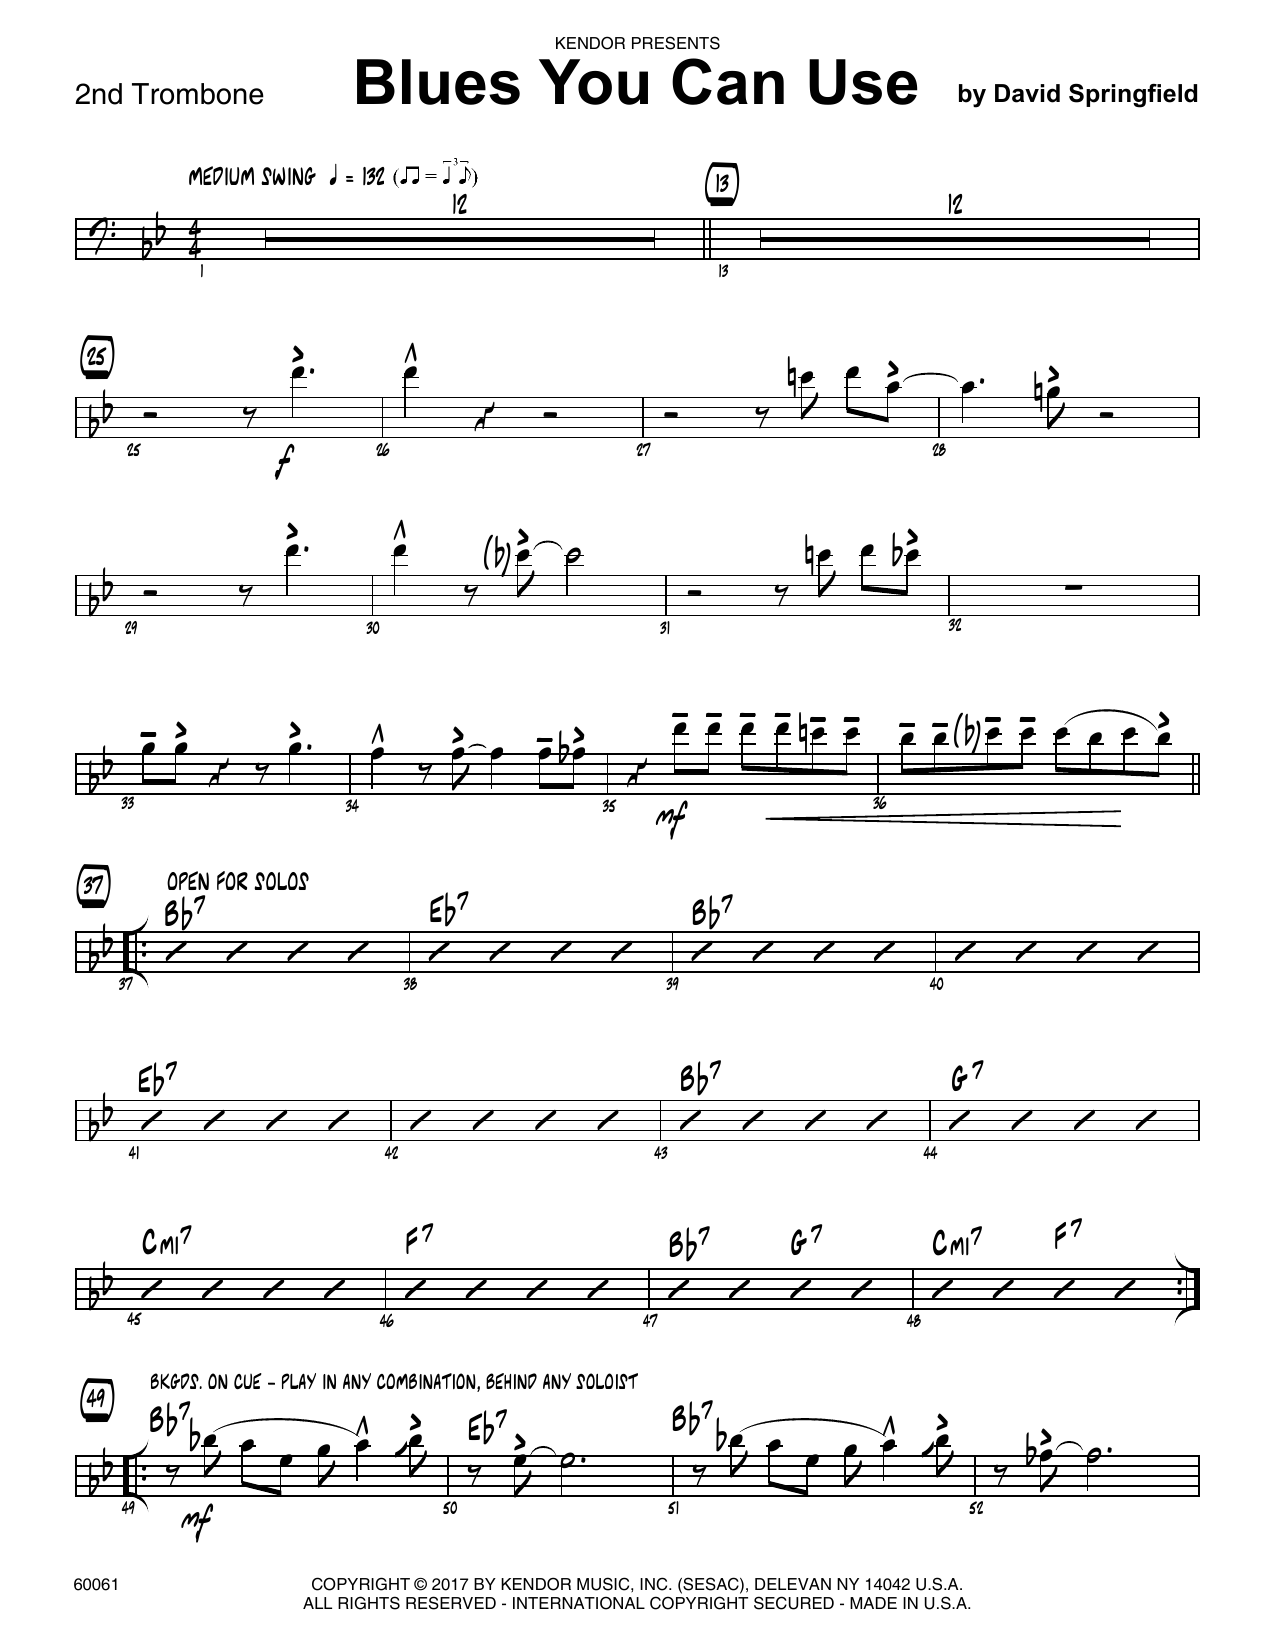 Download David Springfield Blues You Can Use - 2nd Trombone sheet music and printable PDF score & Jazz music notes